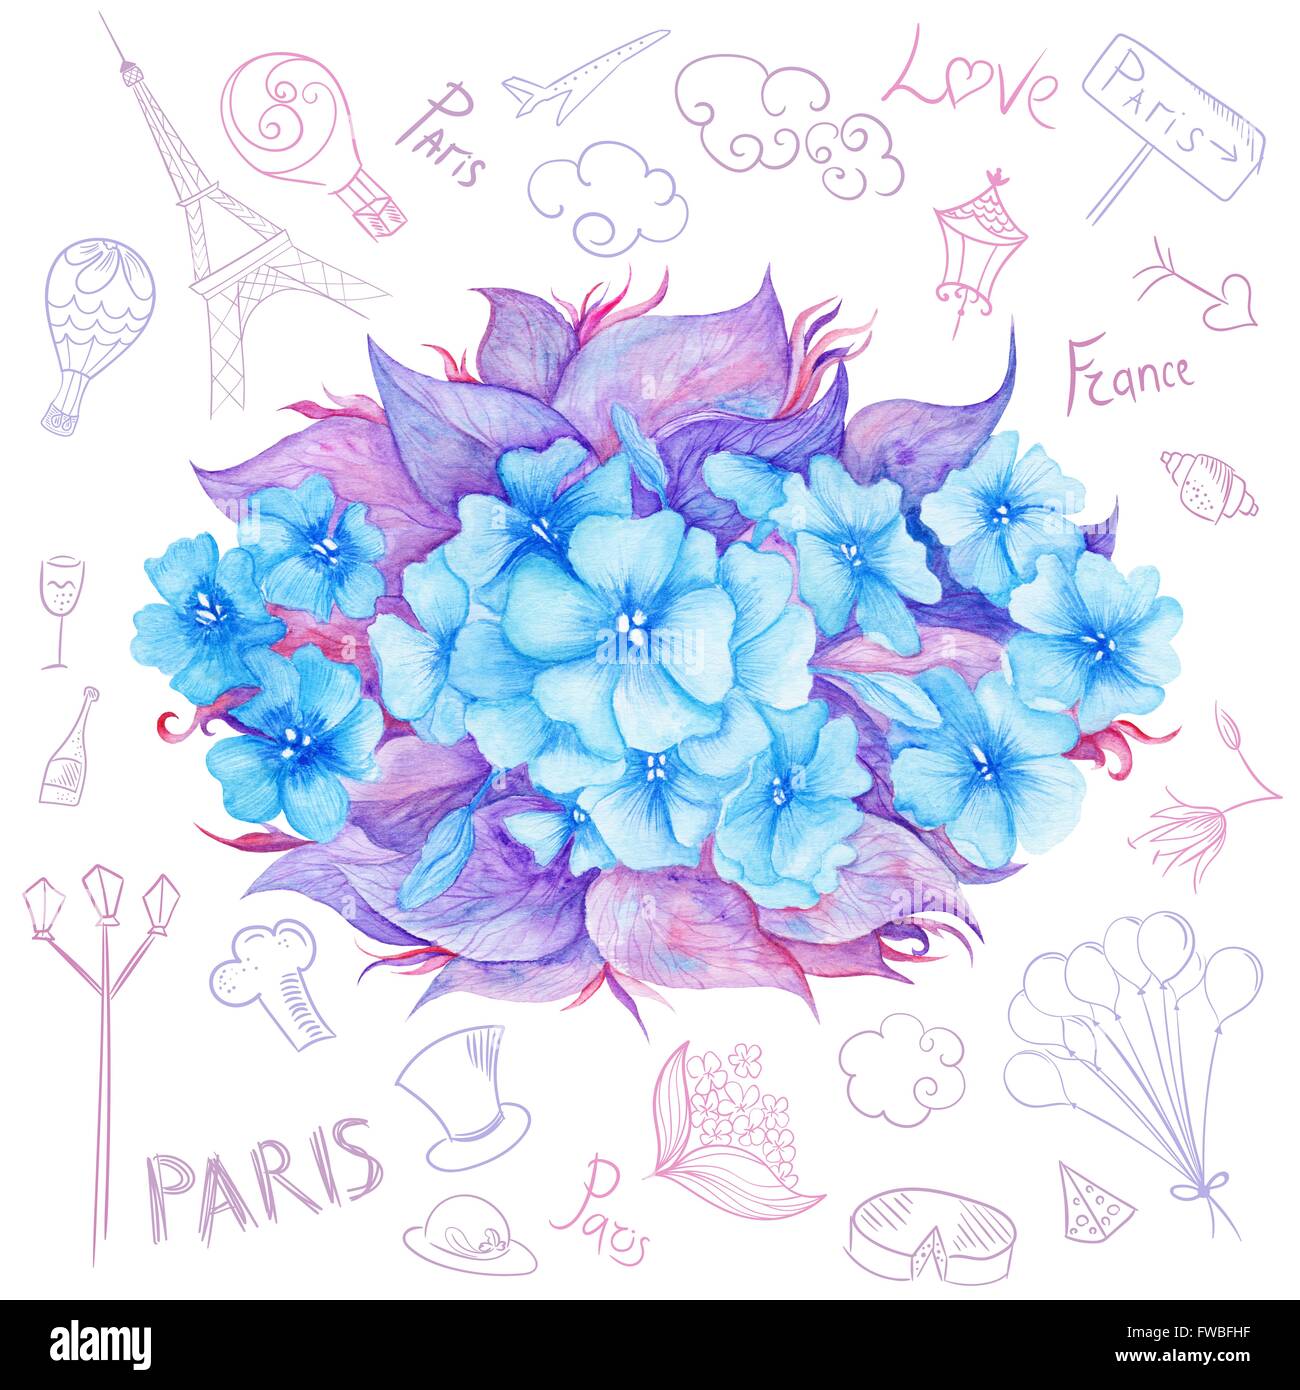 Creative illustration card with blue hydrangea flowers and purple france icons and letterings Stock Photo